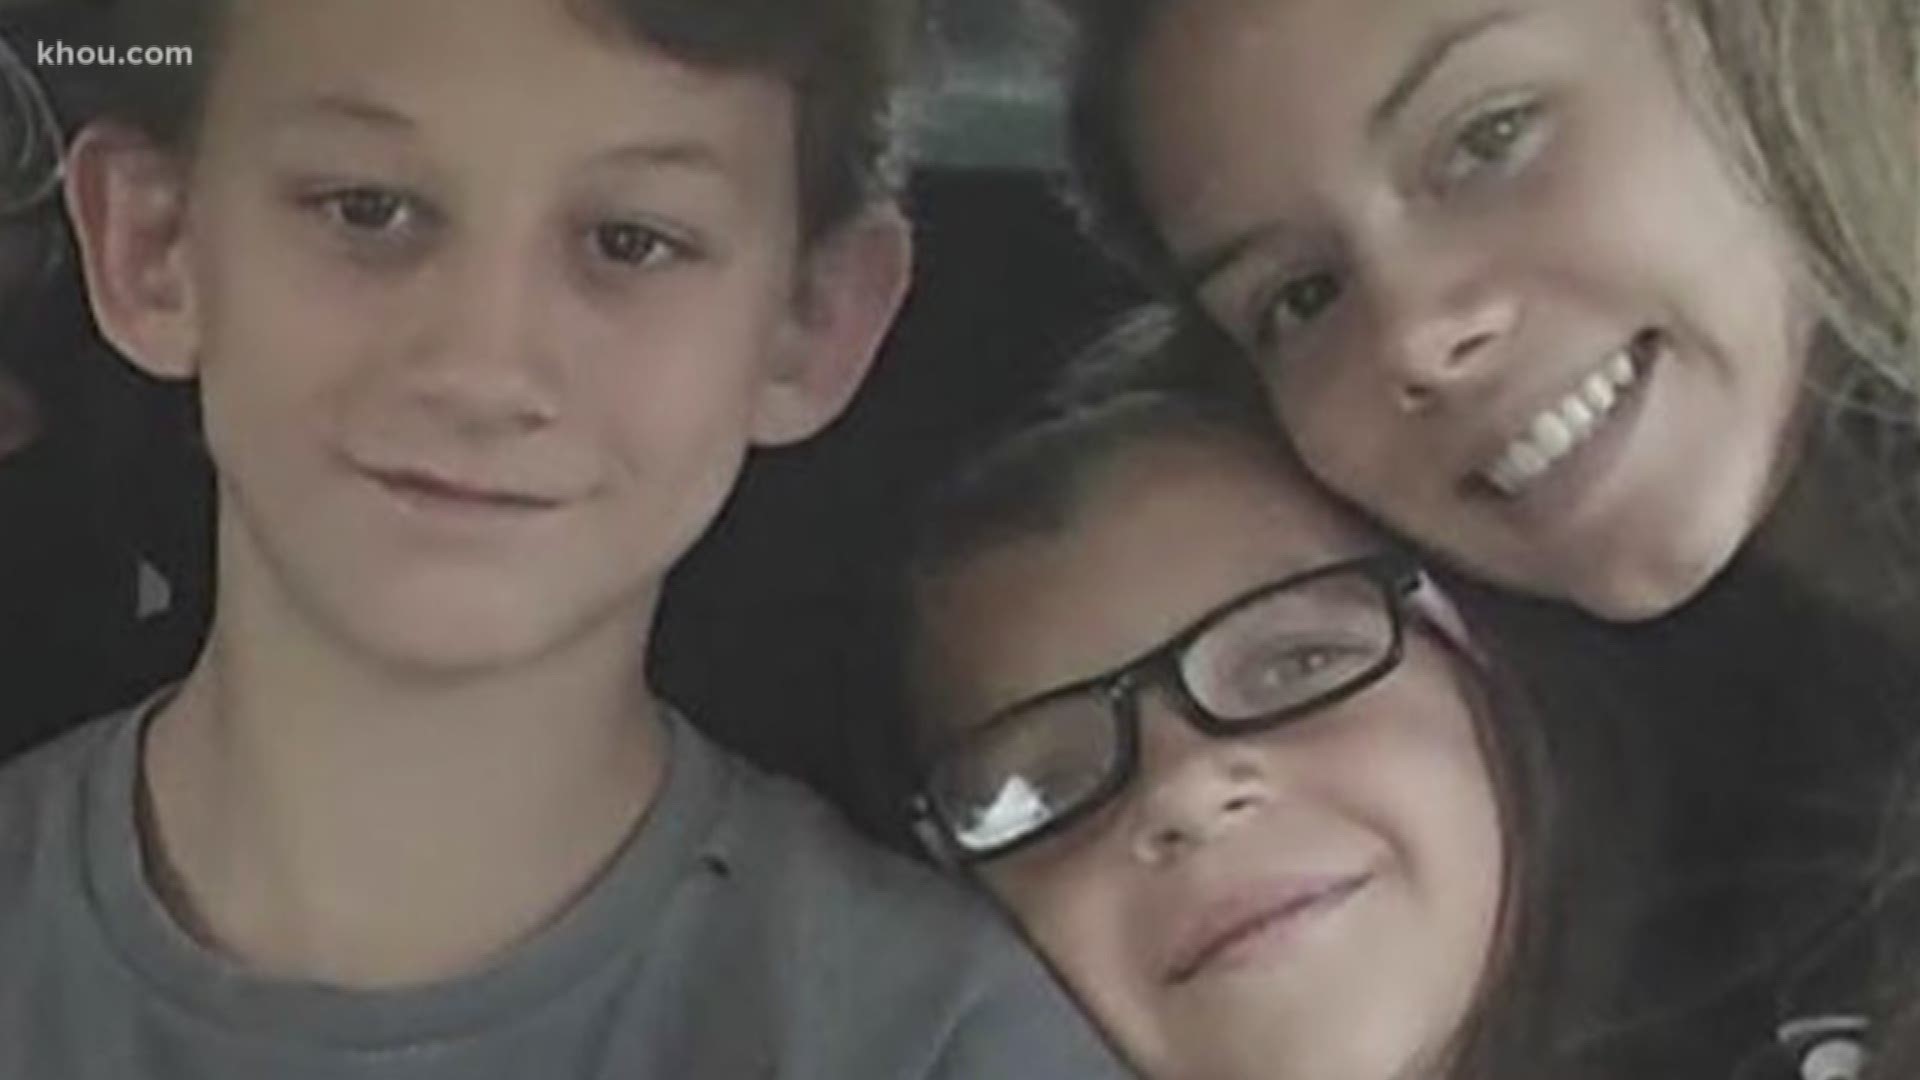 Like many kids, the Williams siblings, who died in a horrific crash near Bastrop over the weekend, had big dreams.  Their older brother shared them with us.